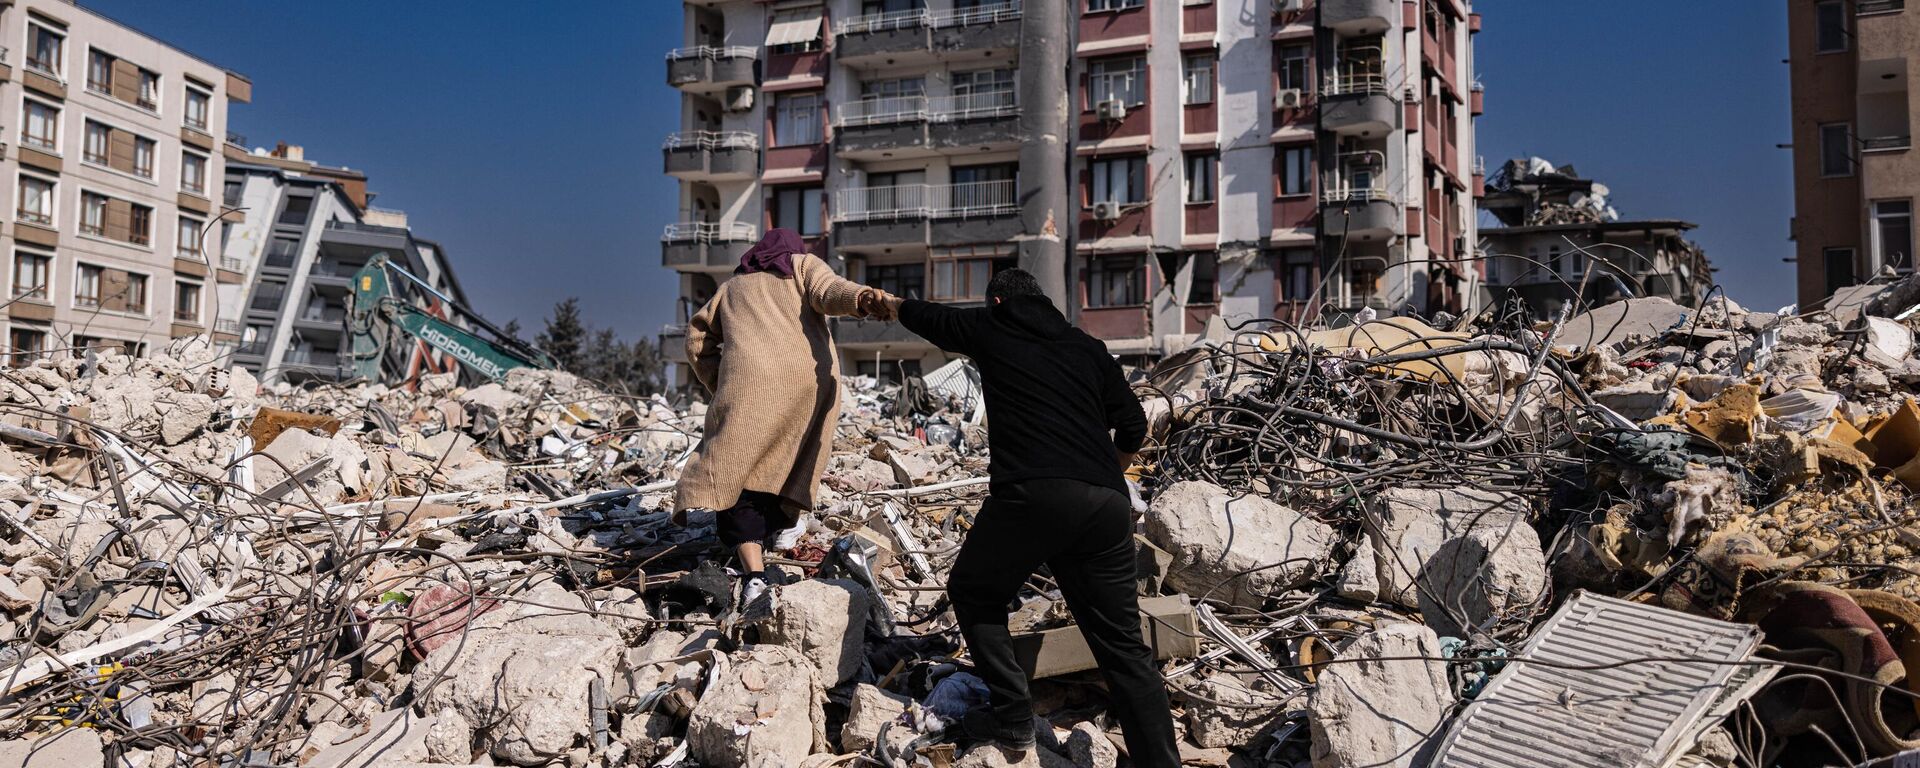 A couple climbs the rubble of collapsed buildings in Antakya, southern Turkey on February 20, 2023. - Sputnik International, 1920, 21.02.2023